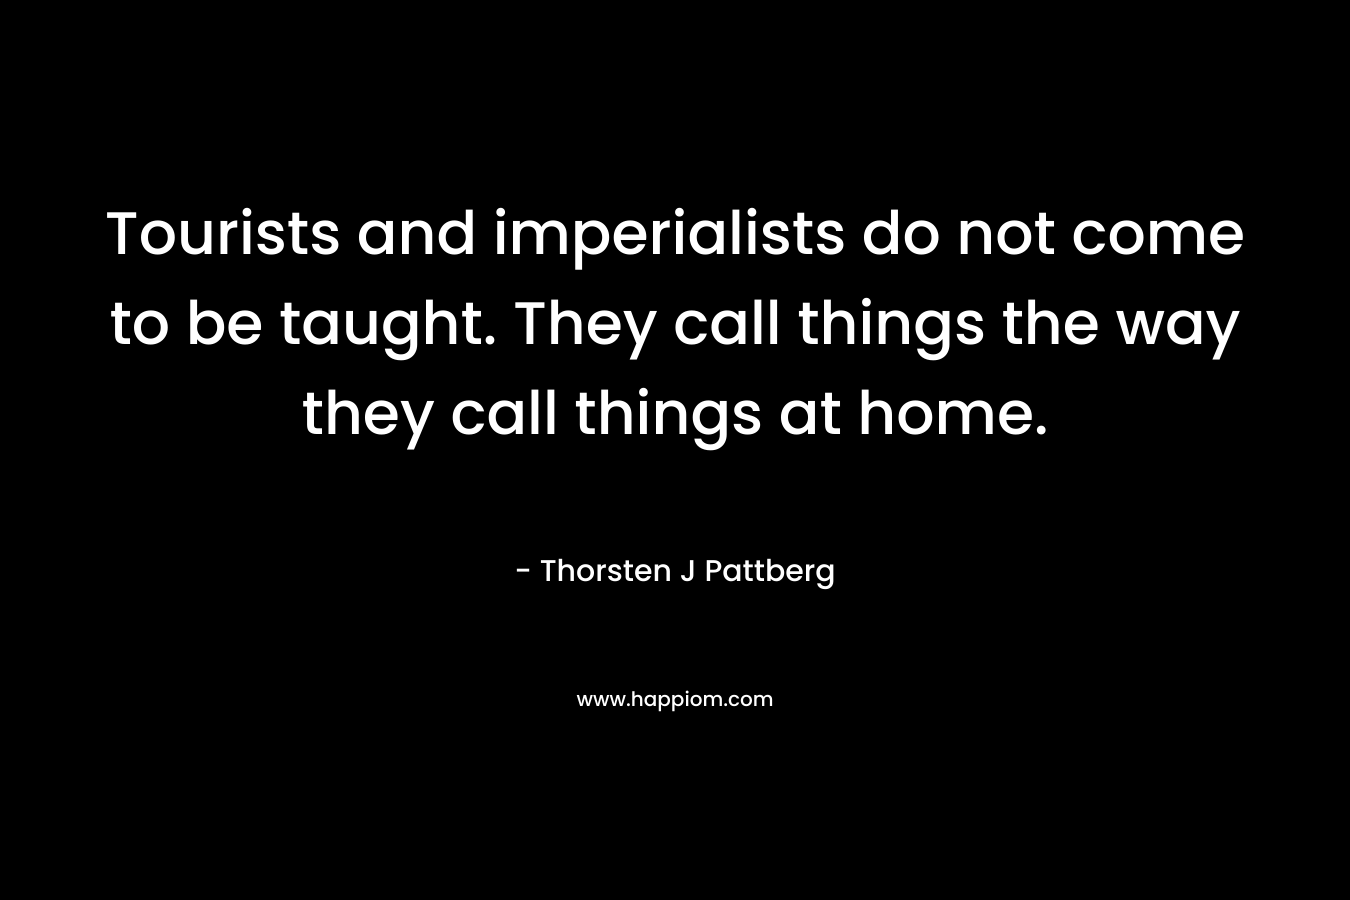 Tourists and imperialists do not come to be taught. They call things the way they call things at home. – Thorsten J Pattberg